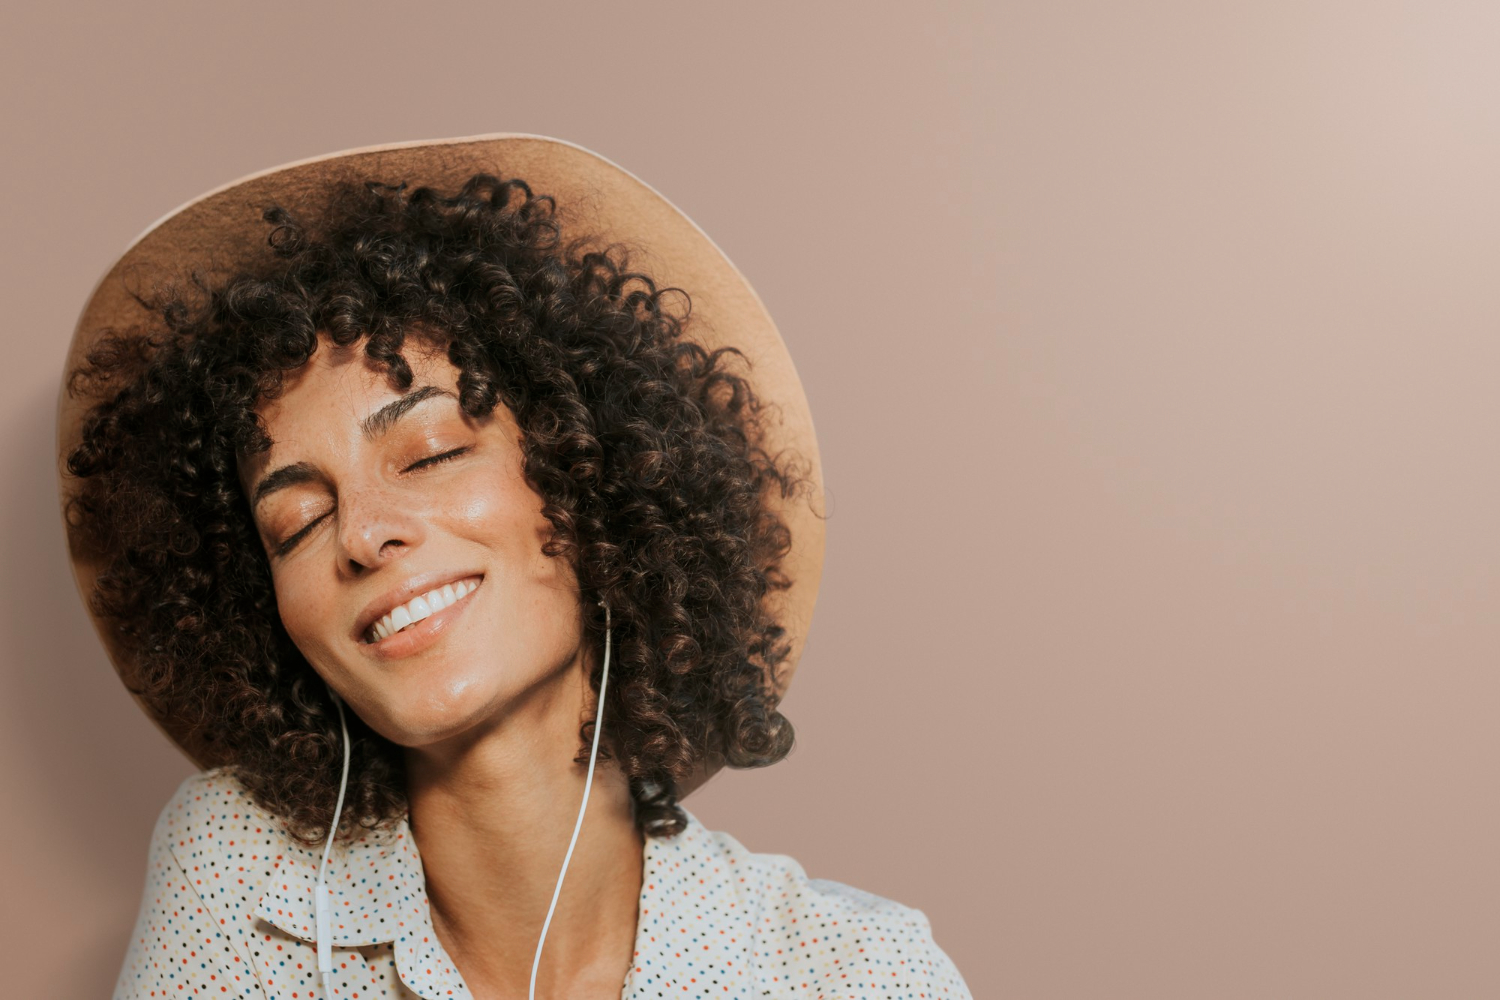 Woman wearing earphones and smiling happily